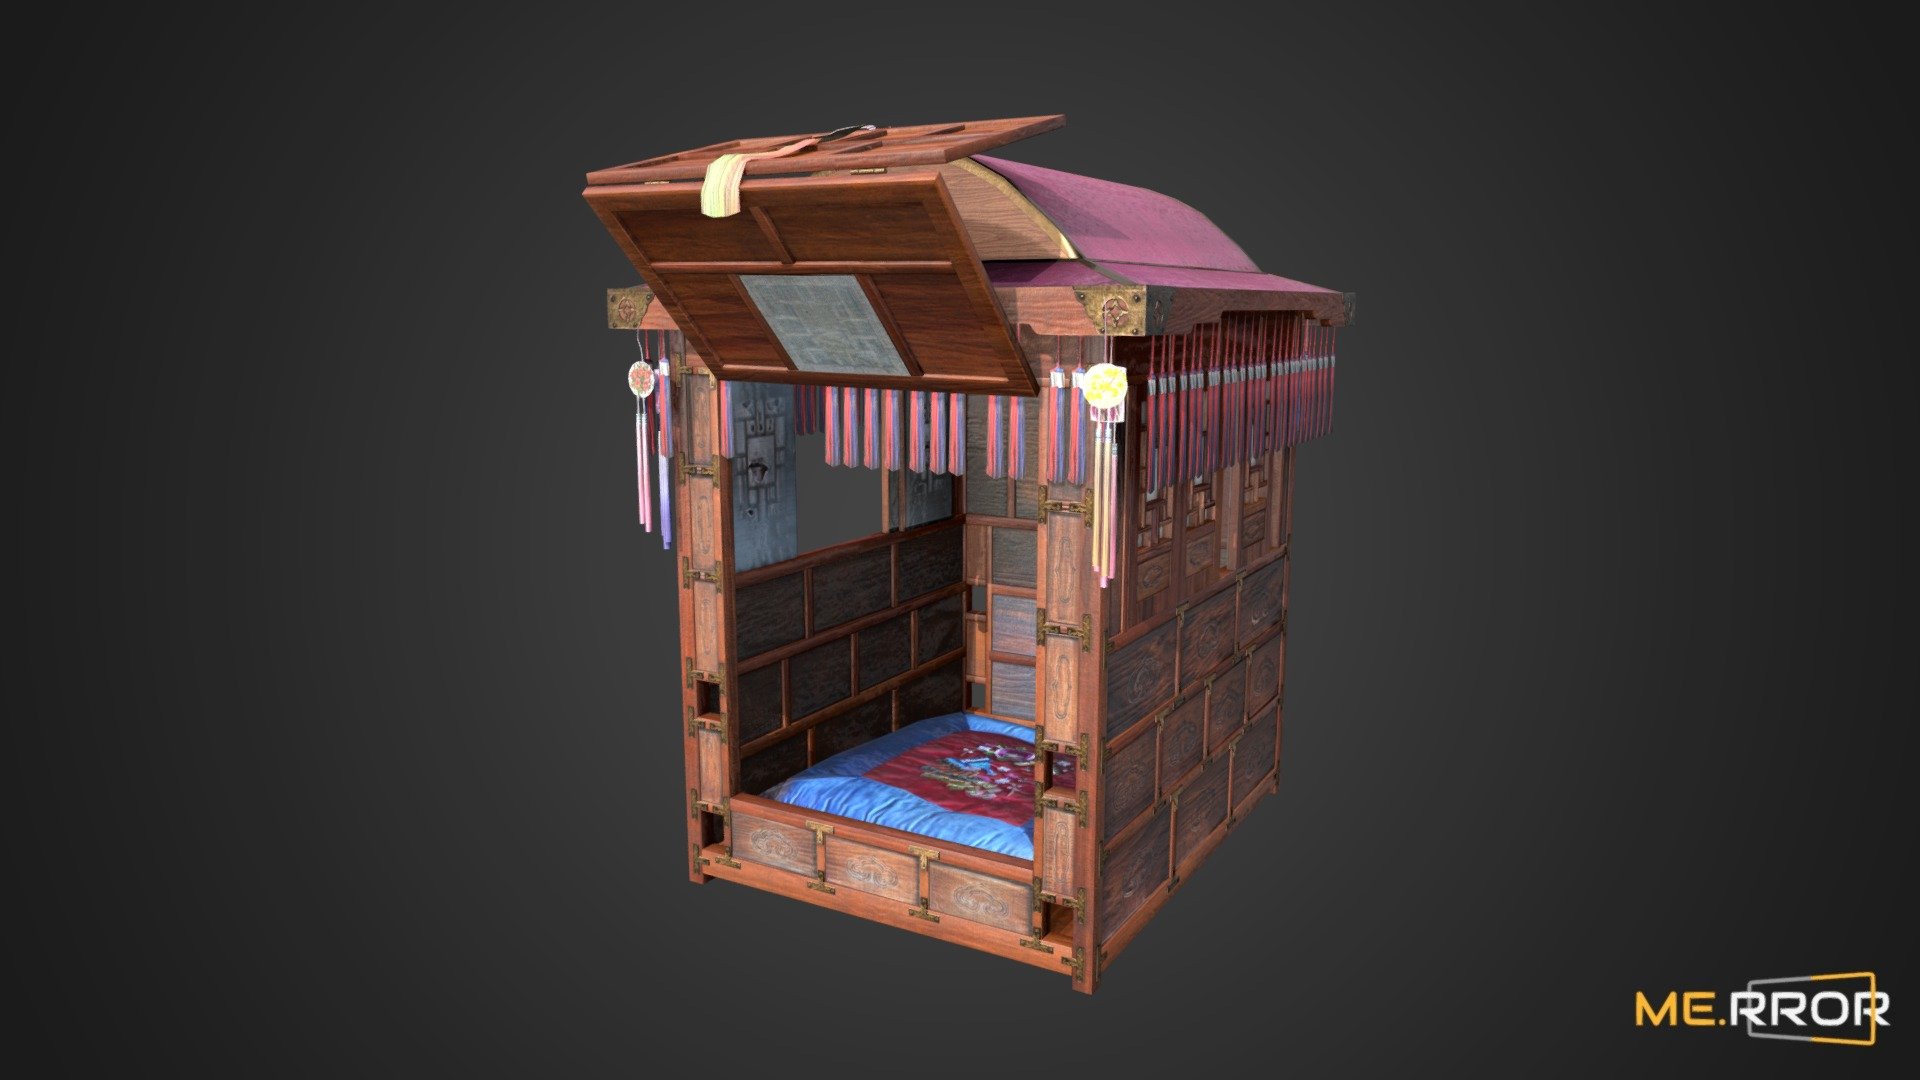 MERROR is a 3D Content PLATFORM which introduces various Asian assets to the 3D world


3DScanning #Photogrametry #ME.RROR - [Game-Ready] Korean Palanquin - Buy Royalty Free 3D model by ME.RROR Studio (@merror) 3d model